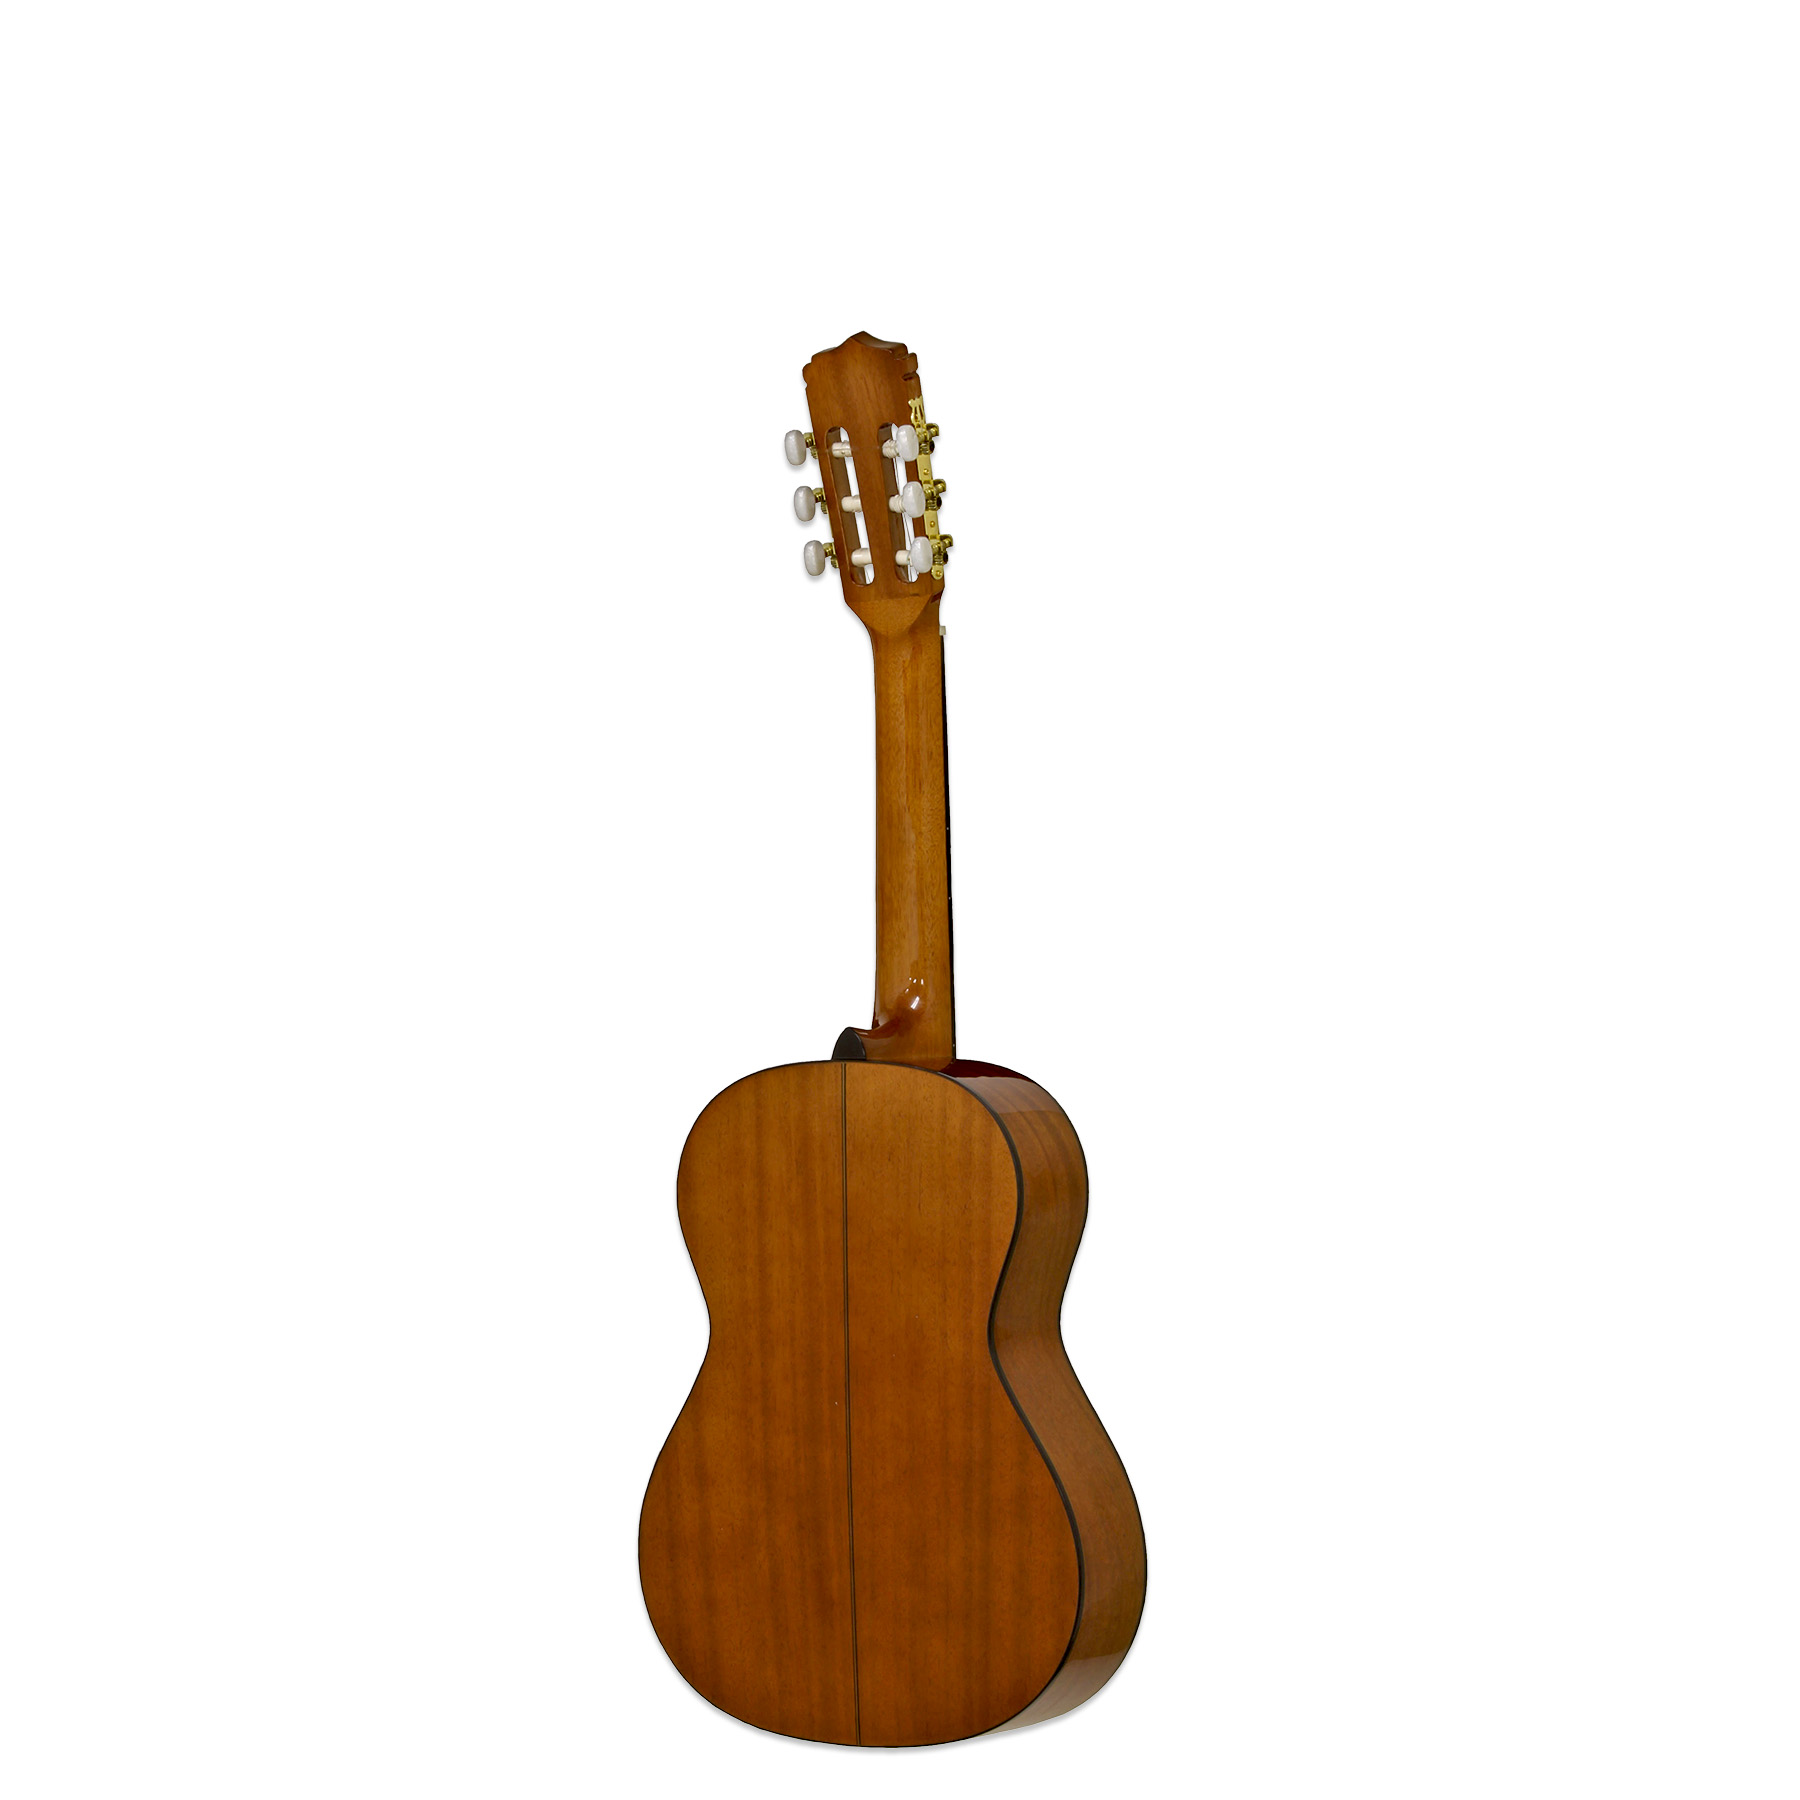 A-20-53 - Aria Guitars - Electric, Acoustic, Classical Guitars and Bass